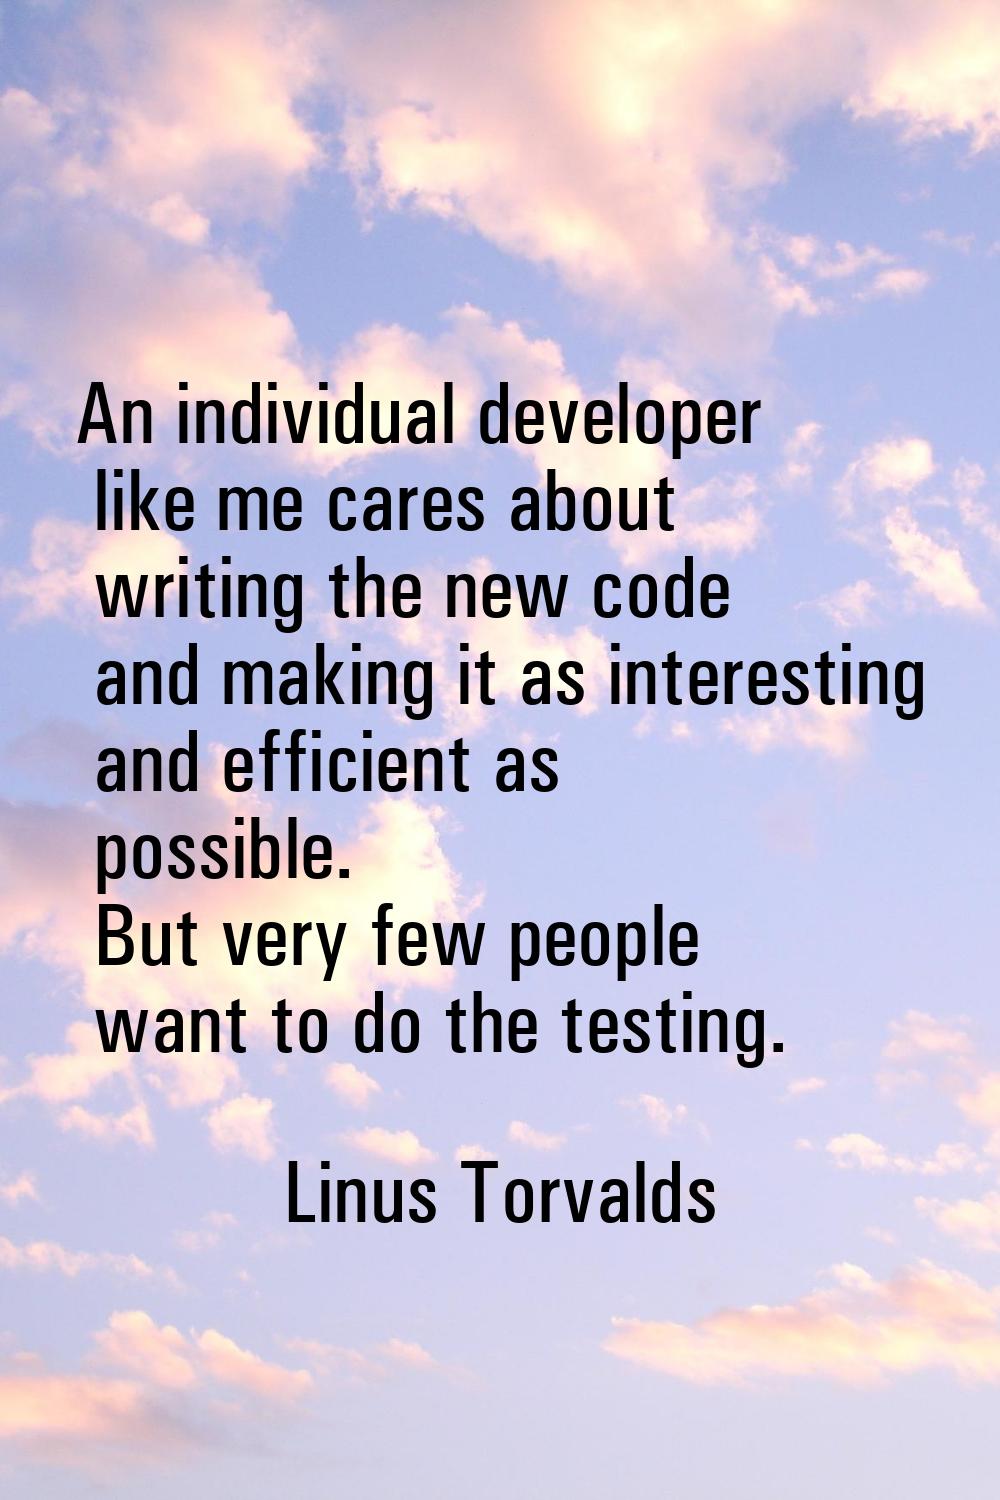 An individual developer like me cares about writing the new code and making it as interesting and e